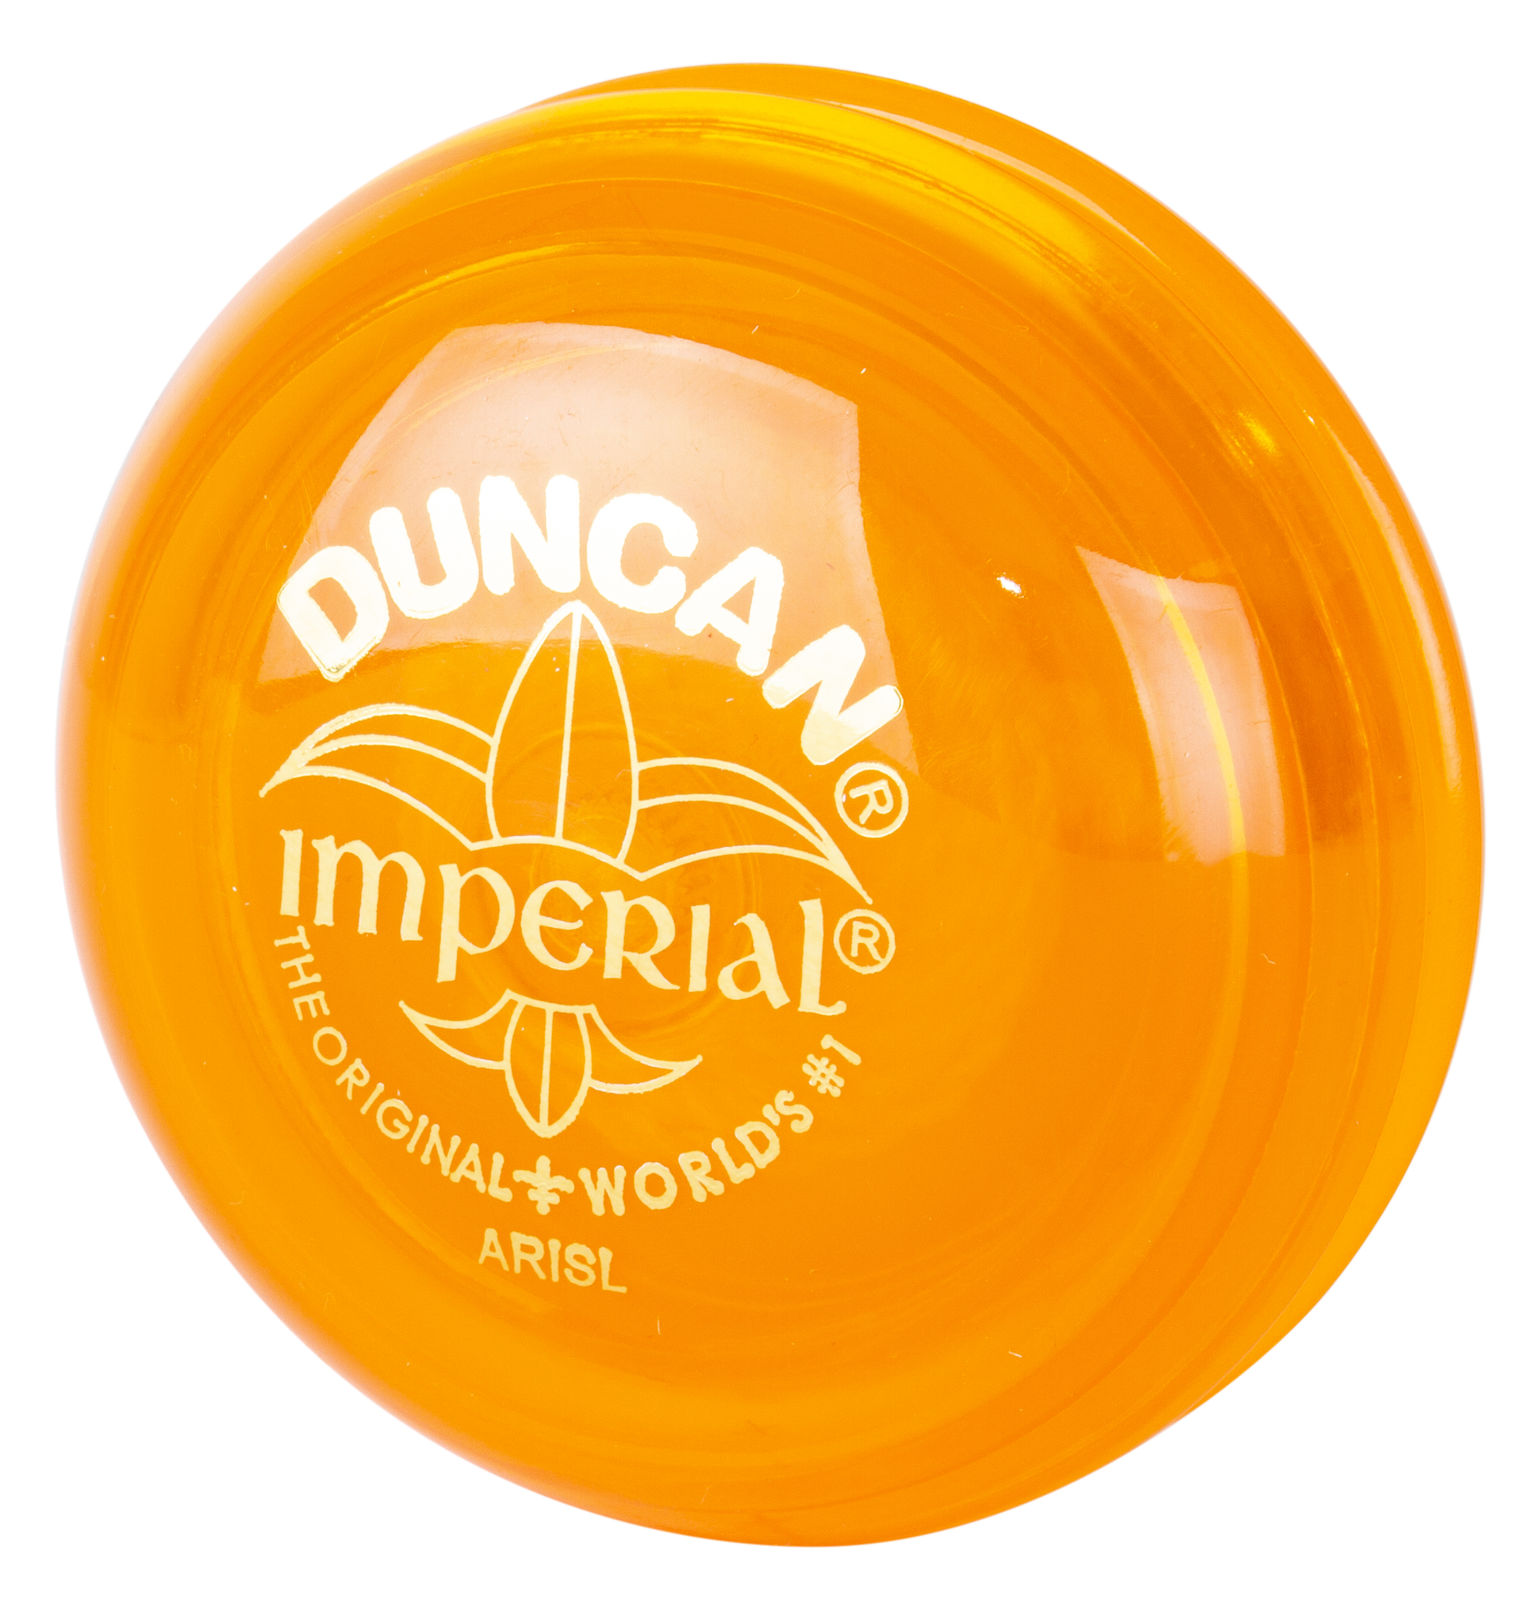 Duncan Toys Imperial Yo-Yo, Beginner Yo-Yo with String, Steel Axle and Plastic Body, Colors May Vary - image 3 of 7